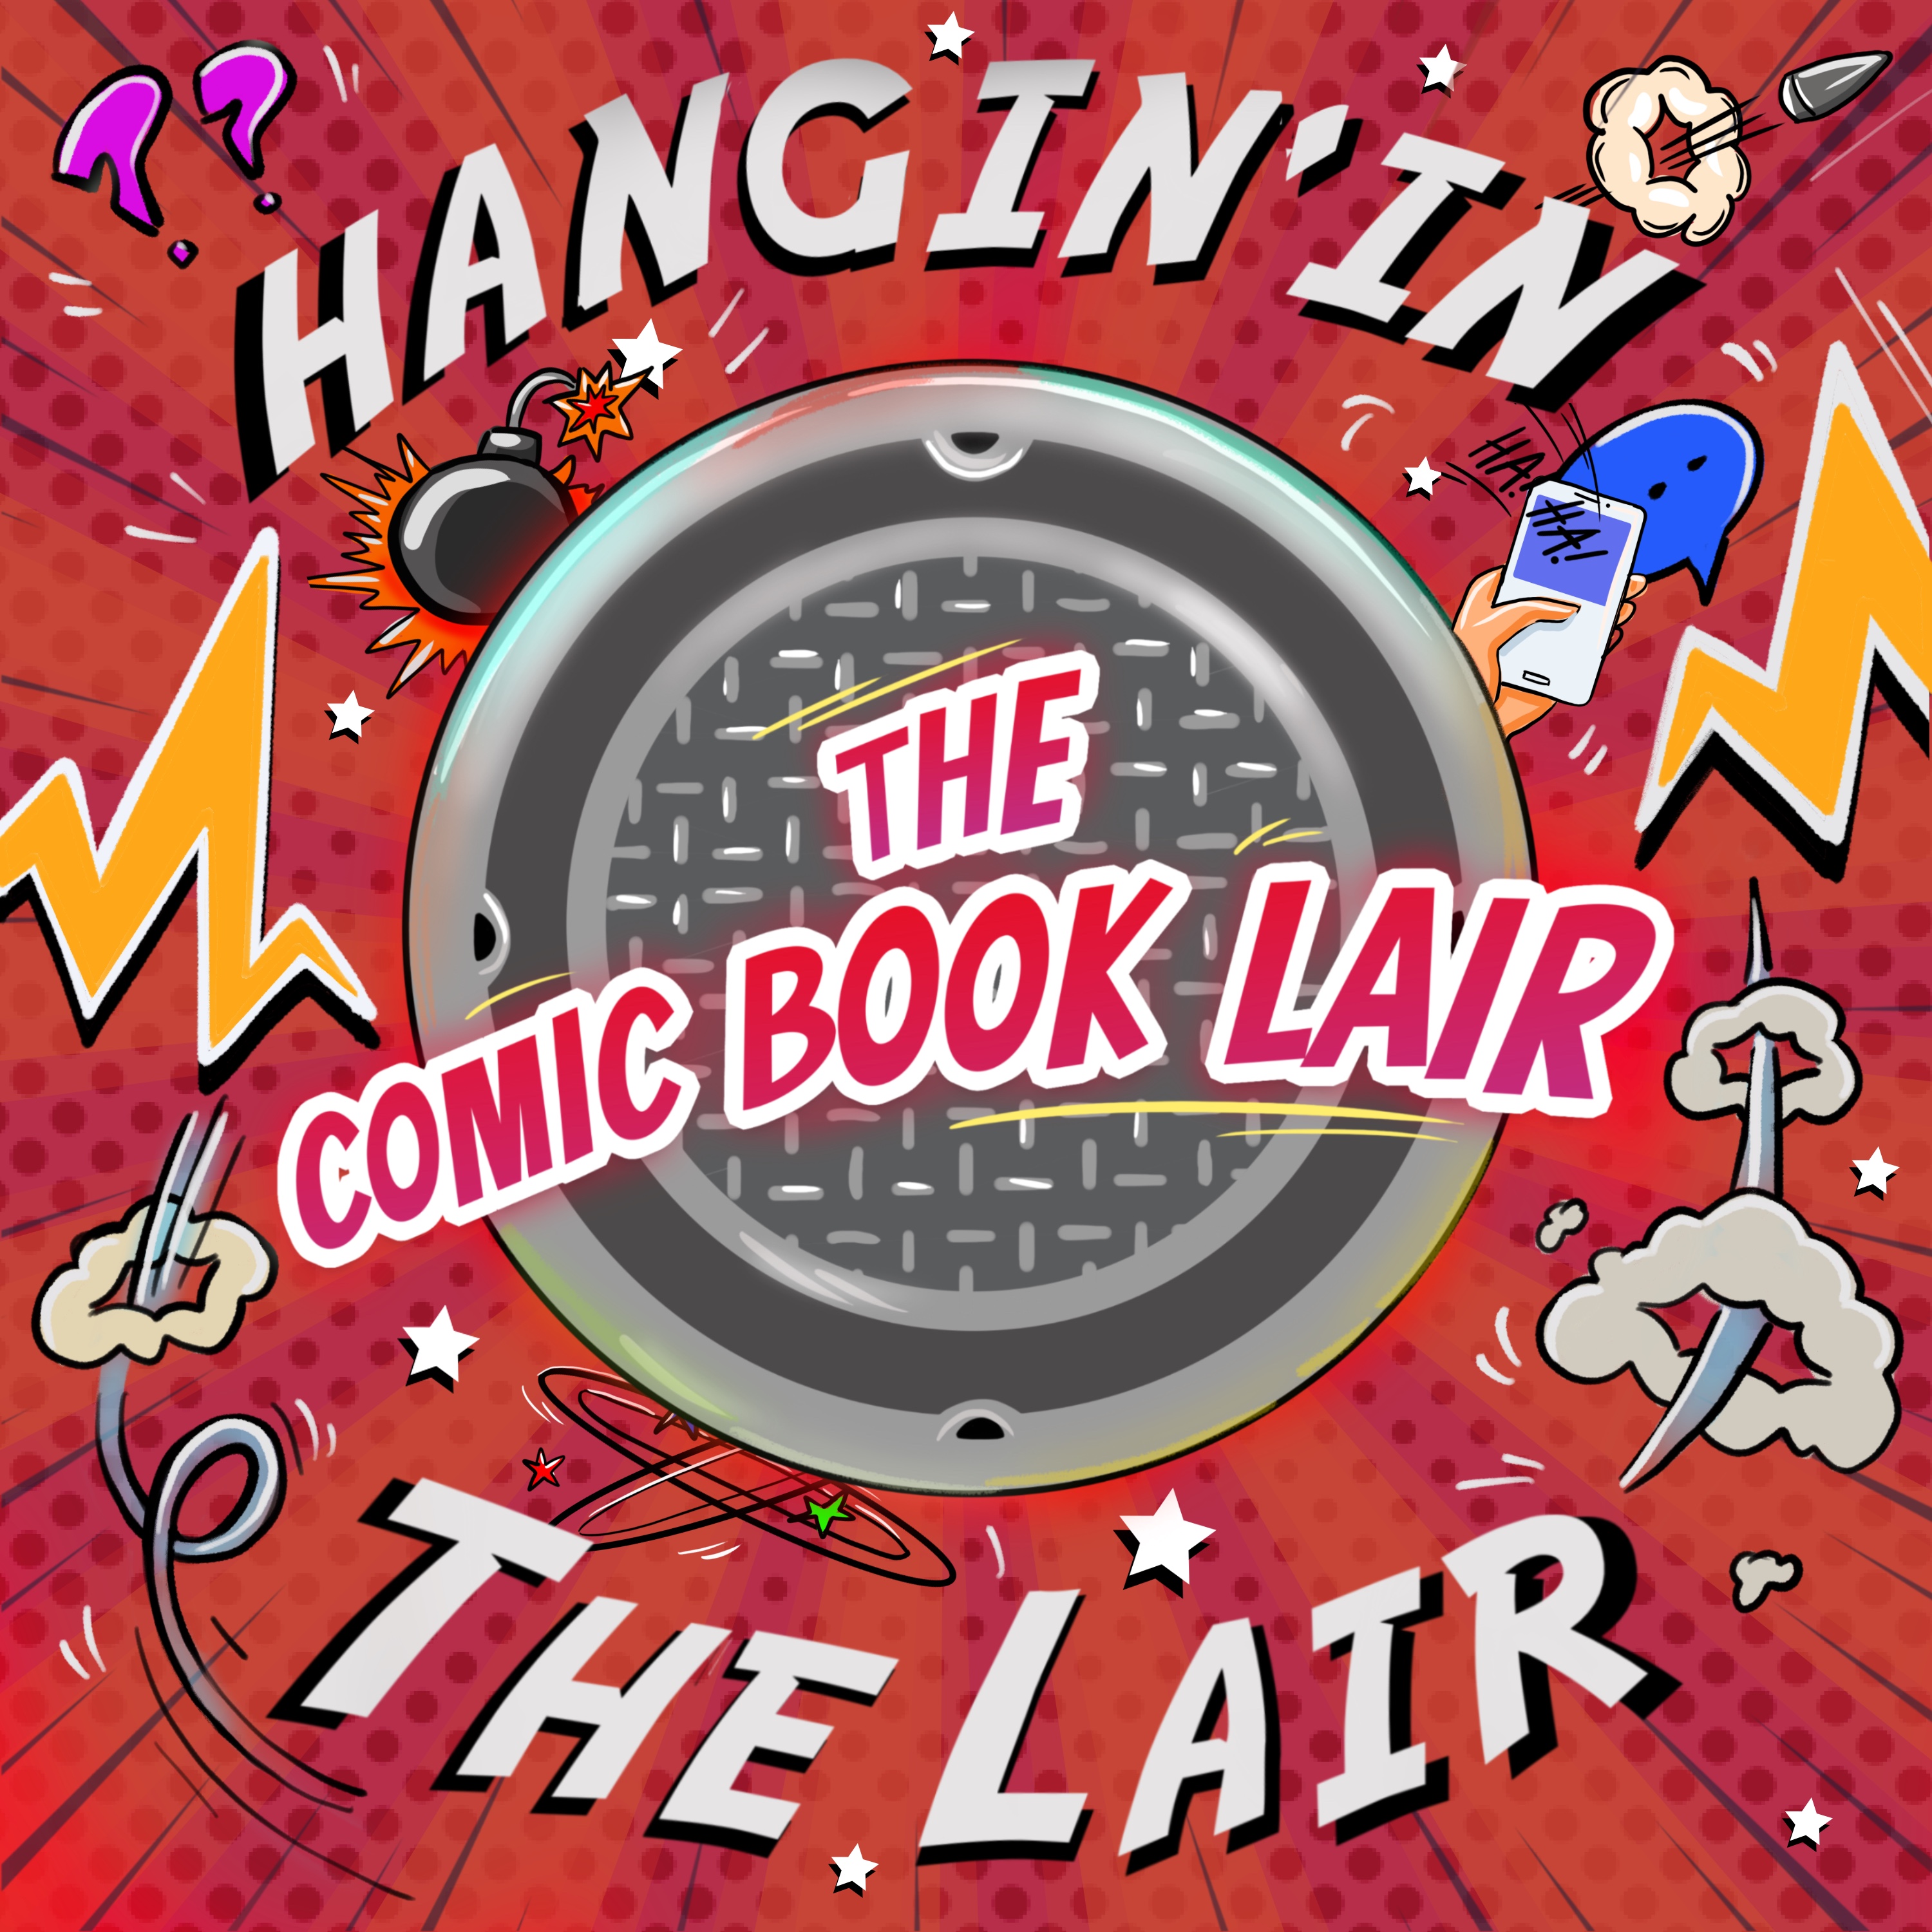 Hangin' In The Lair - Eight Billion Genies, Chew, Above Snakes, Guardians of the Galaxy, and more!